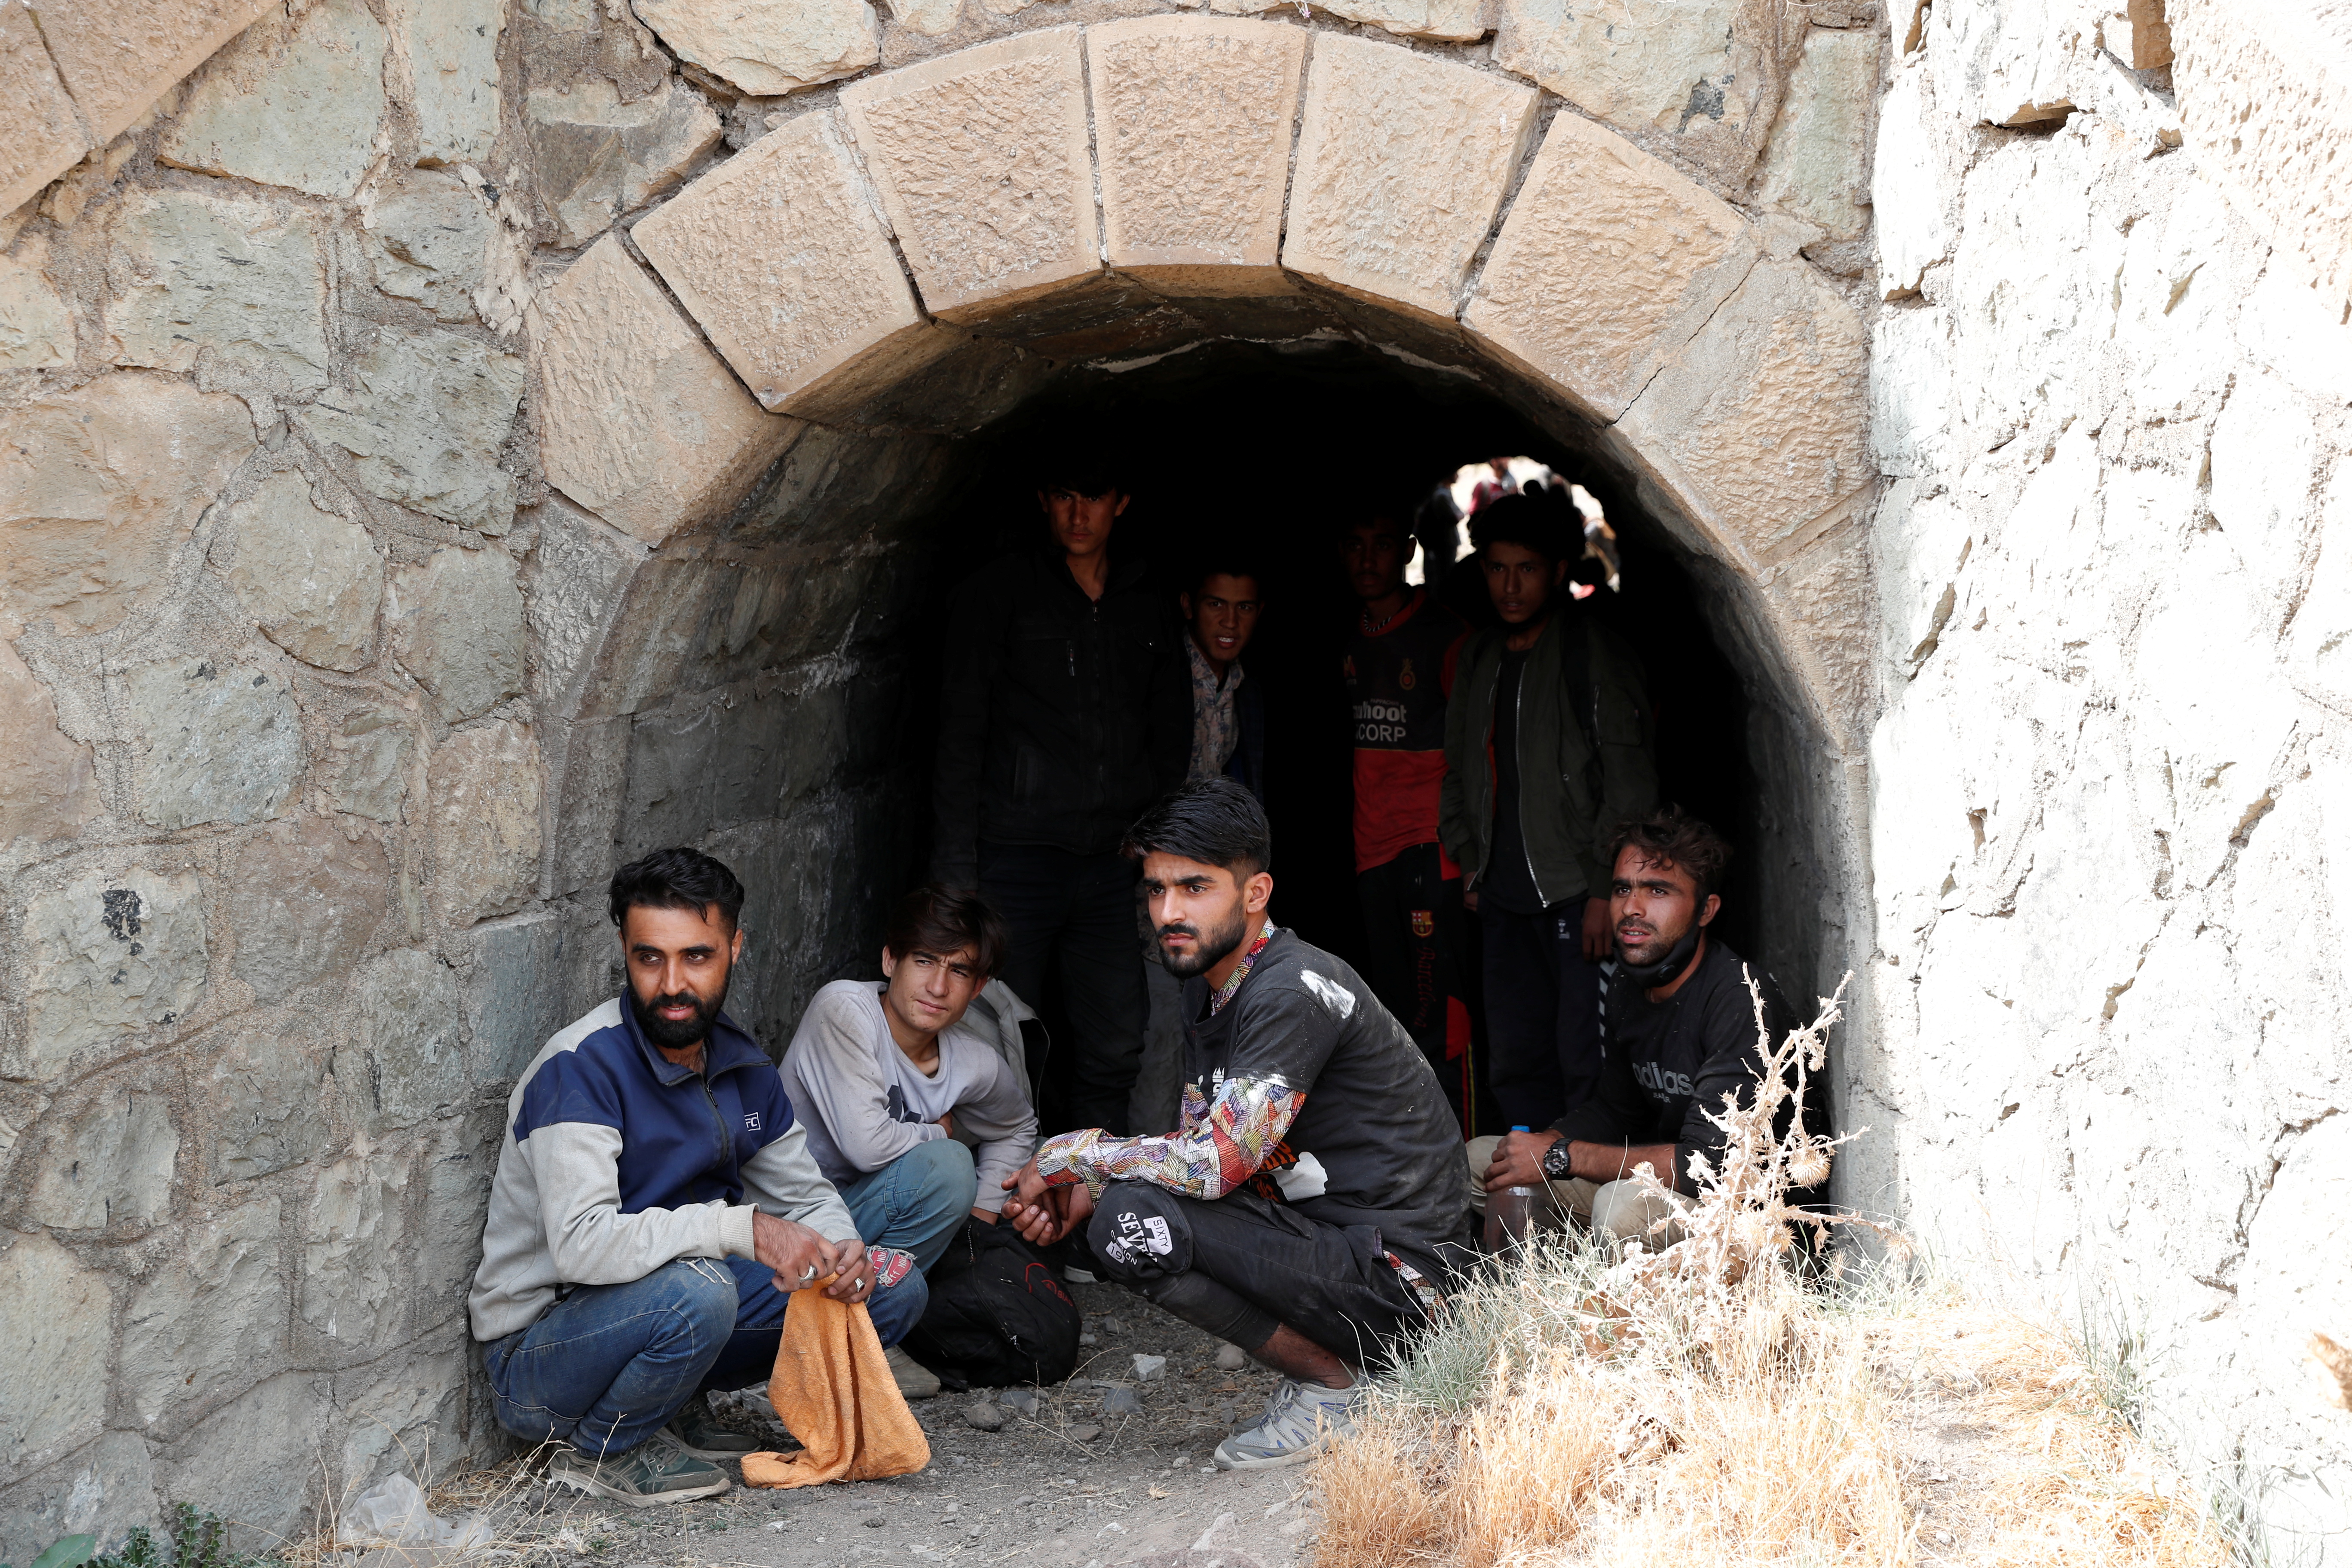 Afghan migrants hide from security forces in a tunnel under train tracks after crossing illegally into Turkey from Iran, near Tatvan in Bitlis province, Turkey August 23, 2021. Picture taken August 23, 2021. REUTERS/Murad Sezer